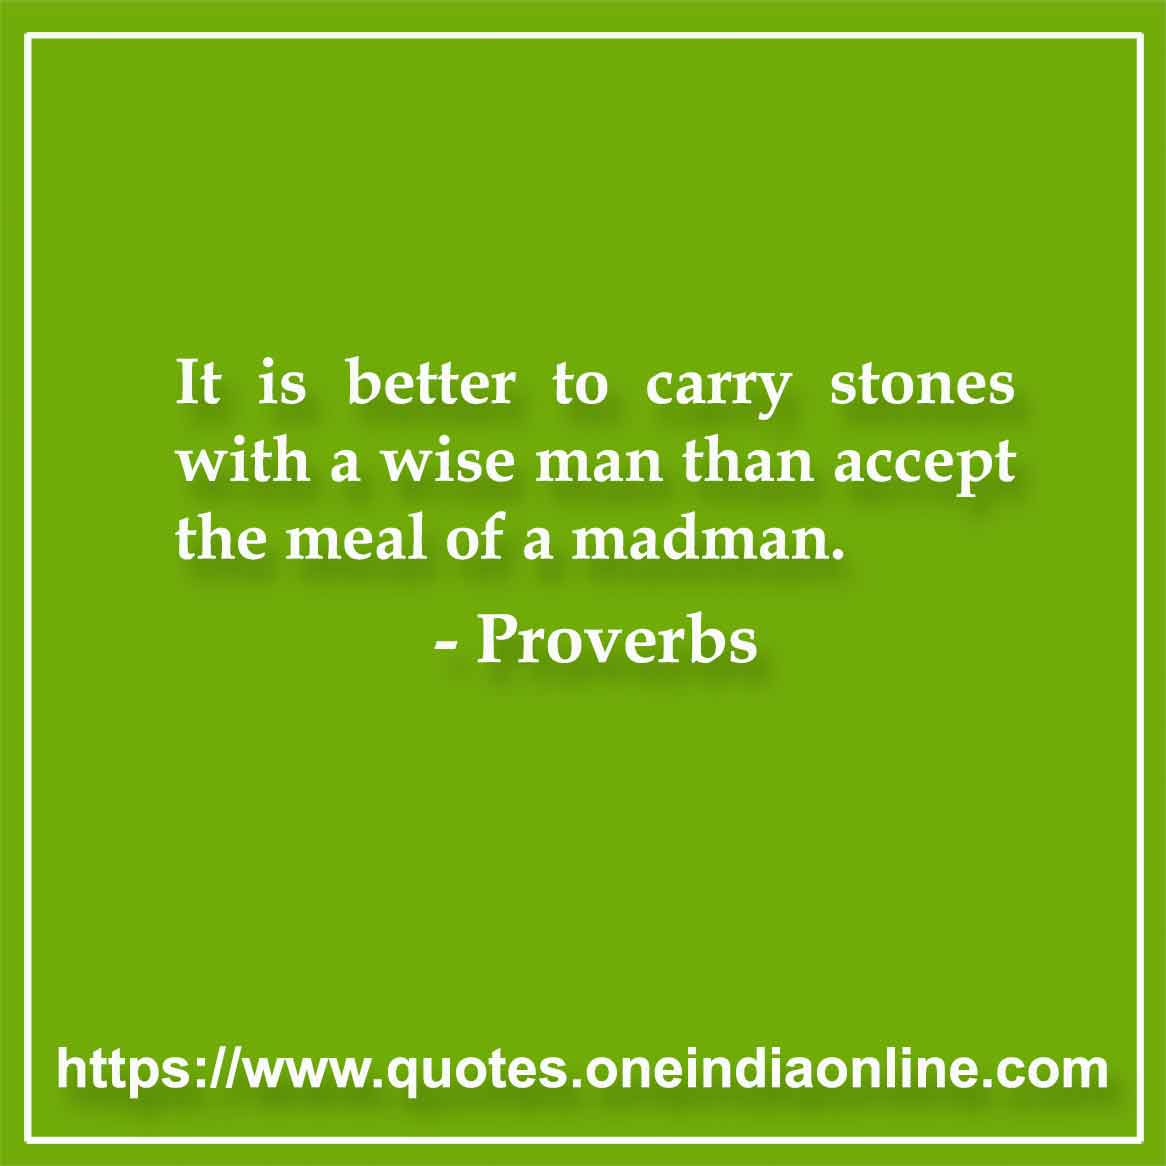 It is better to carry stones with a wise man than accept the meal of a madman.